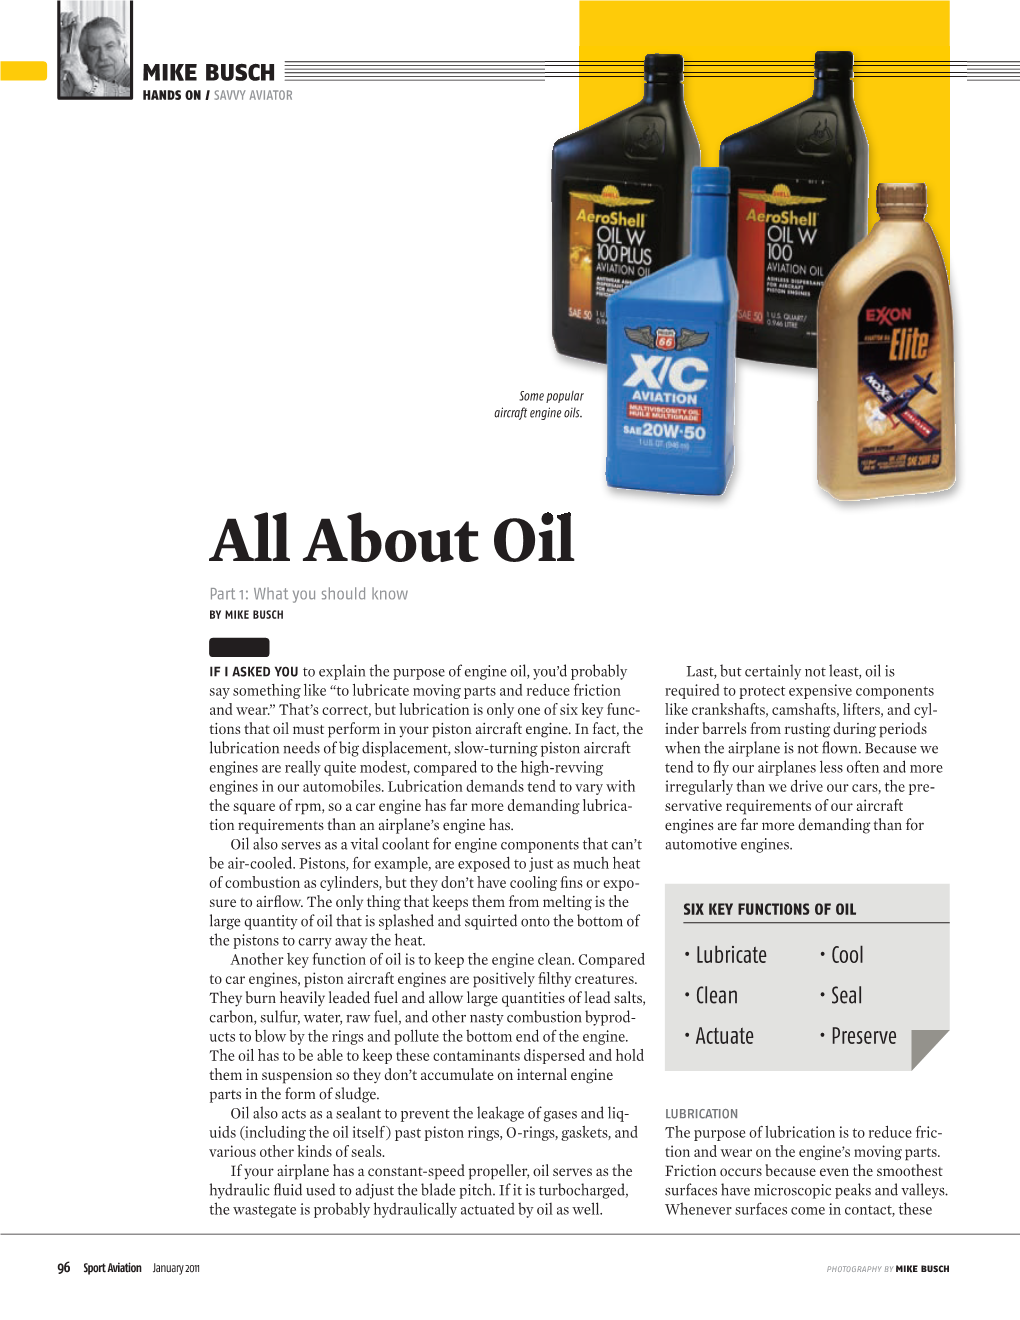 About Oil Part 1: What You Should Know by MIKE BUSCH